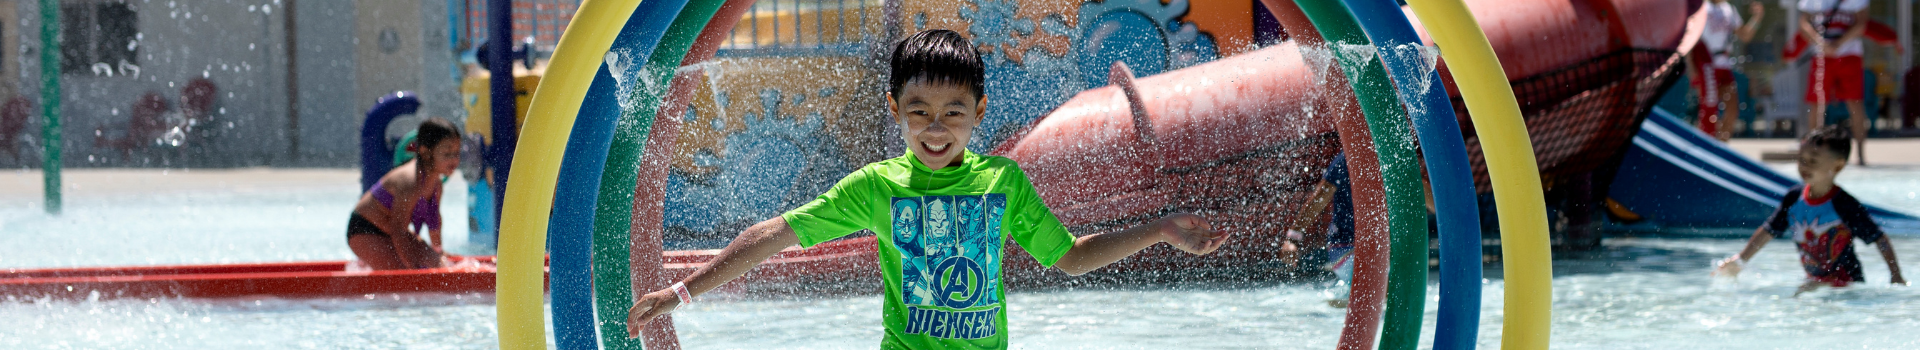 Child at Water Park